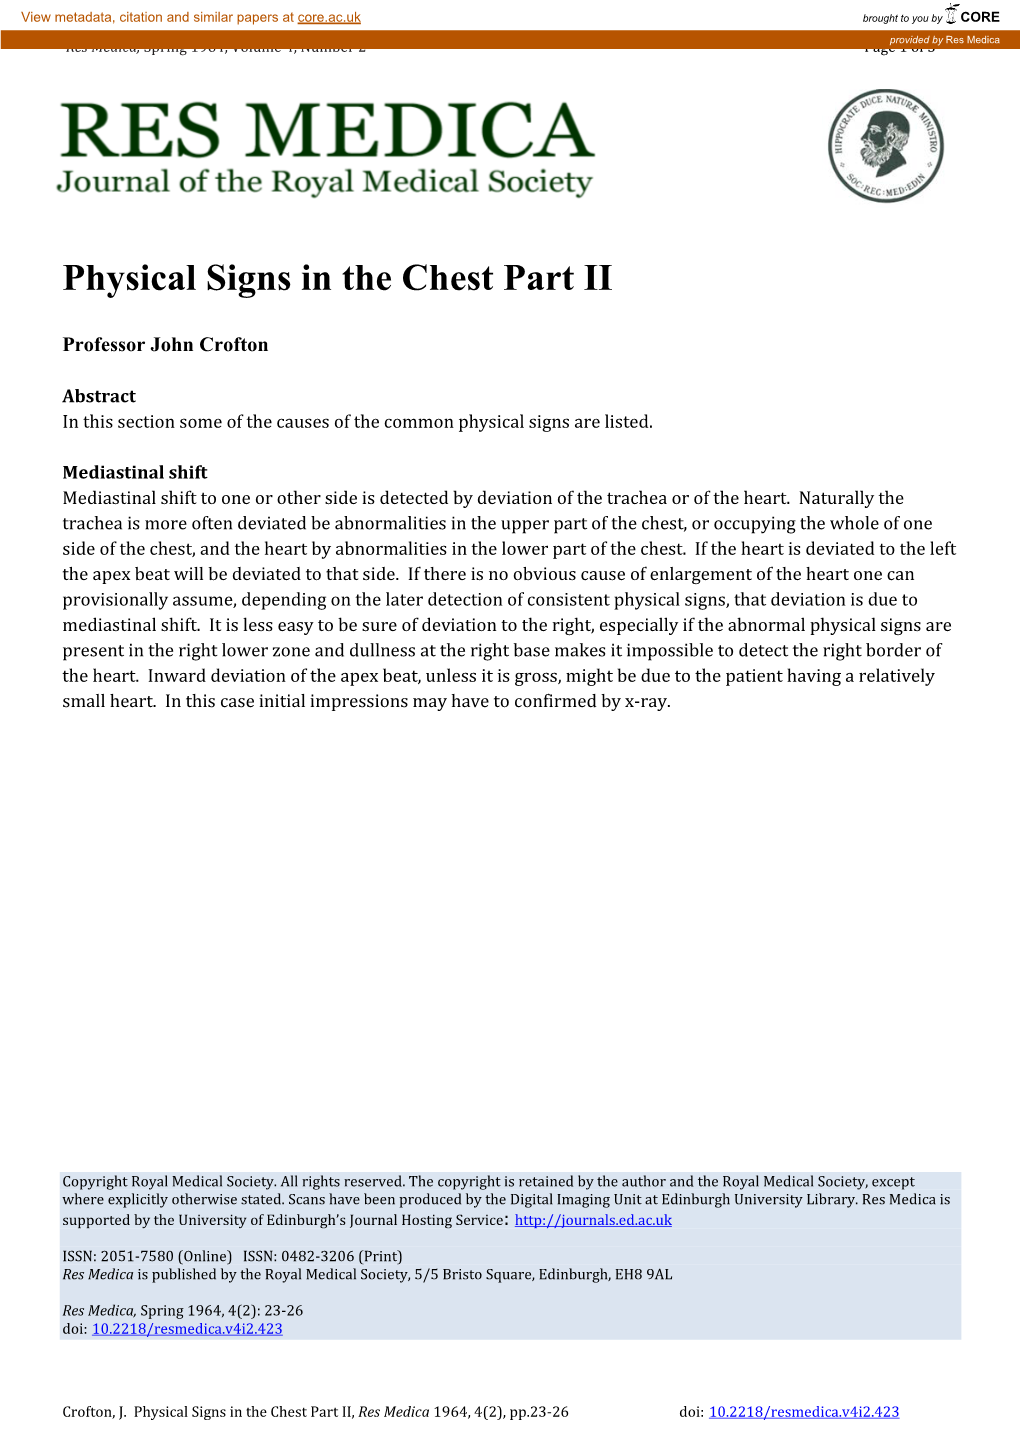 Physical Signs in the Chest Part II